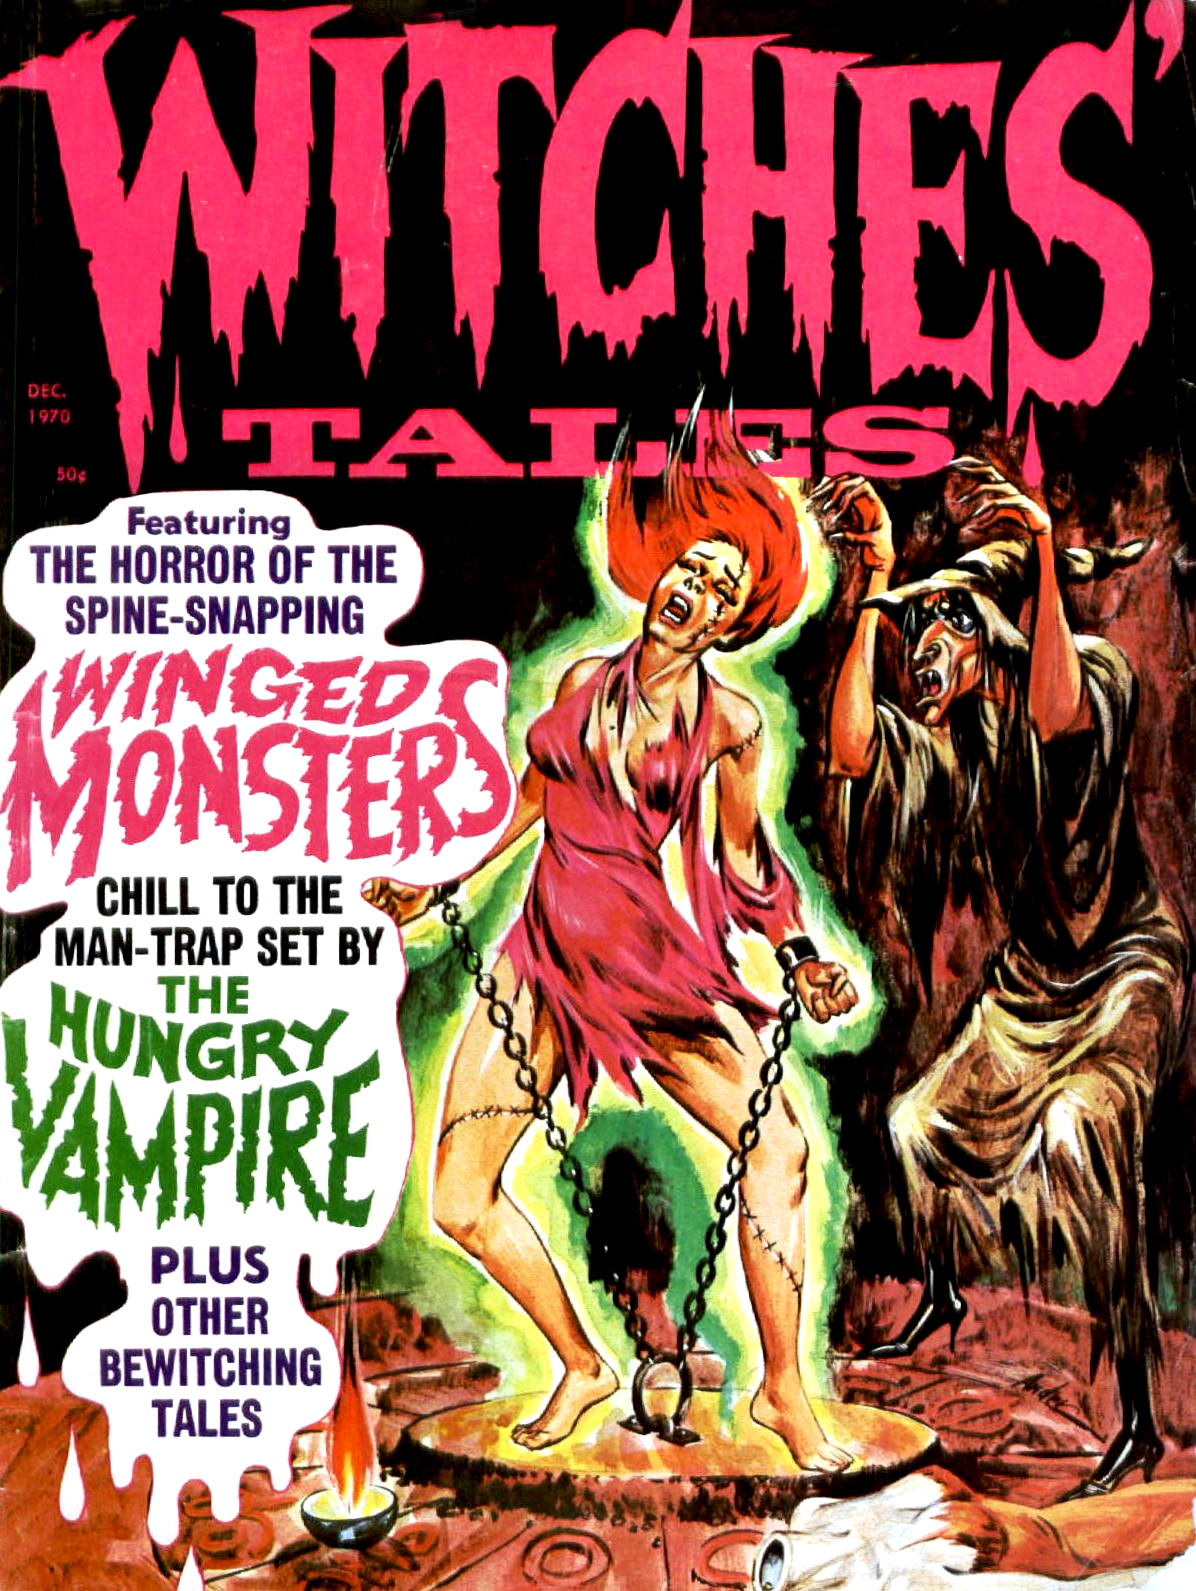 Witches Tales #16